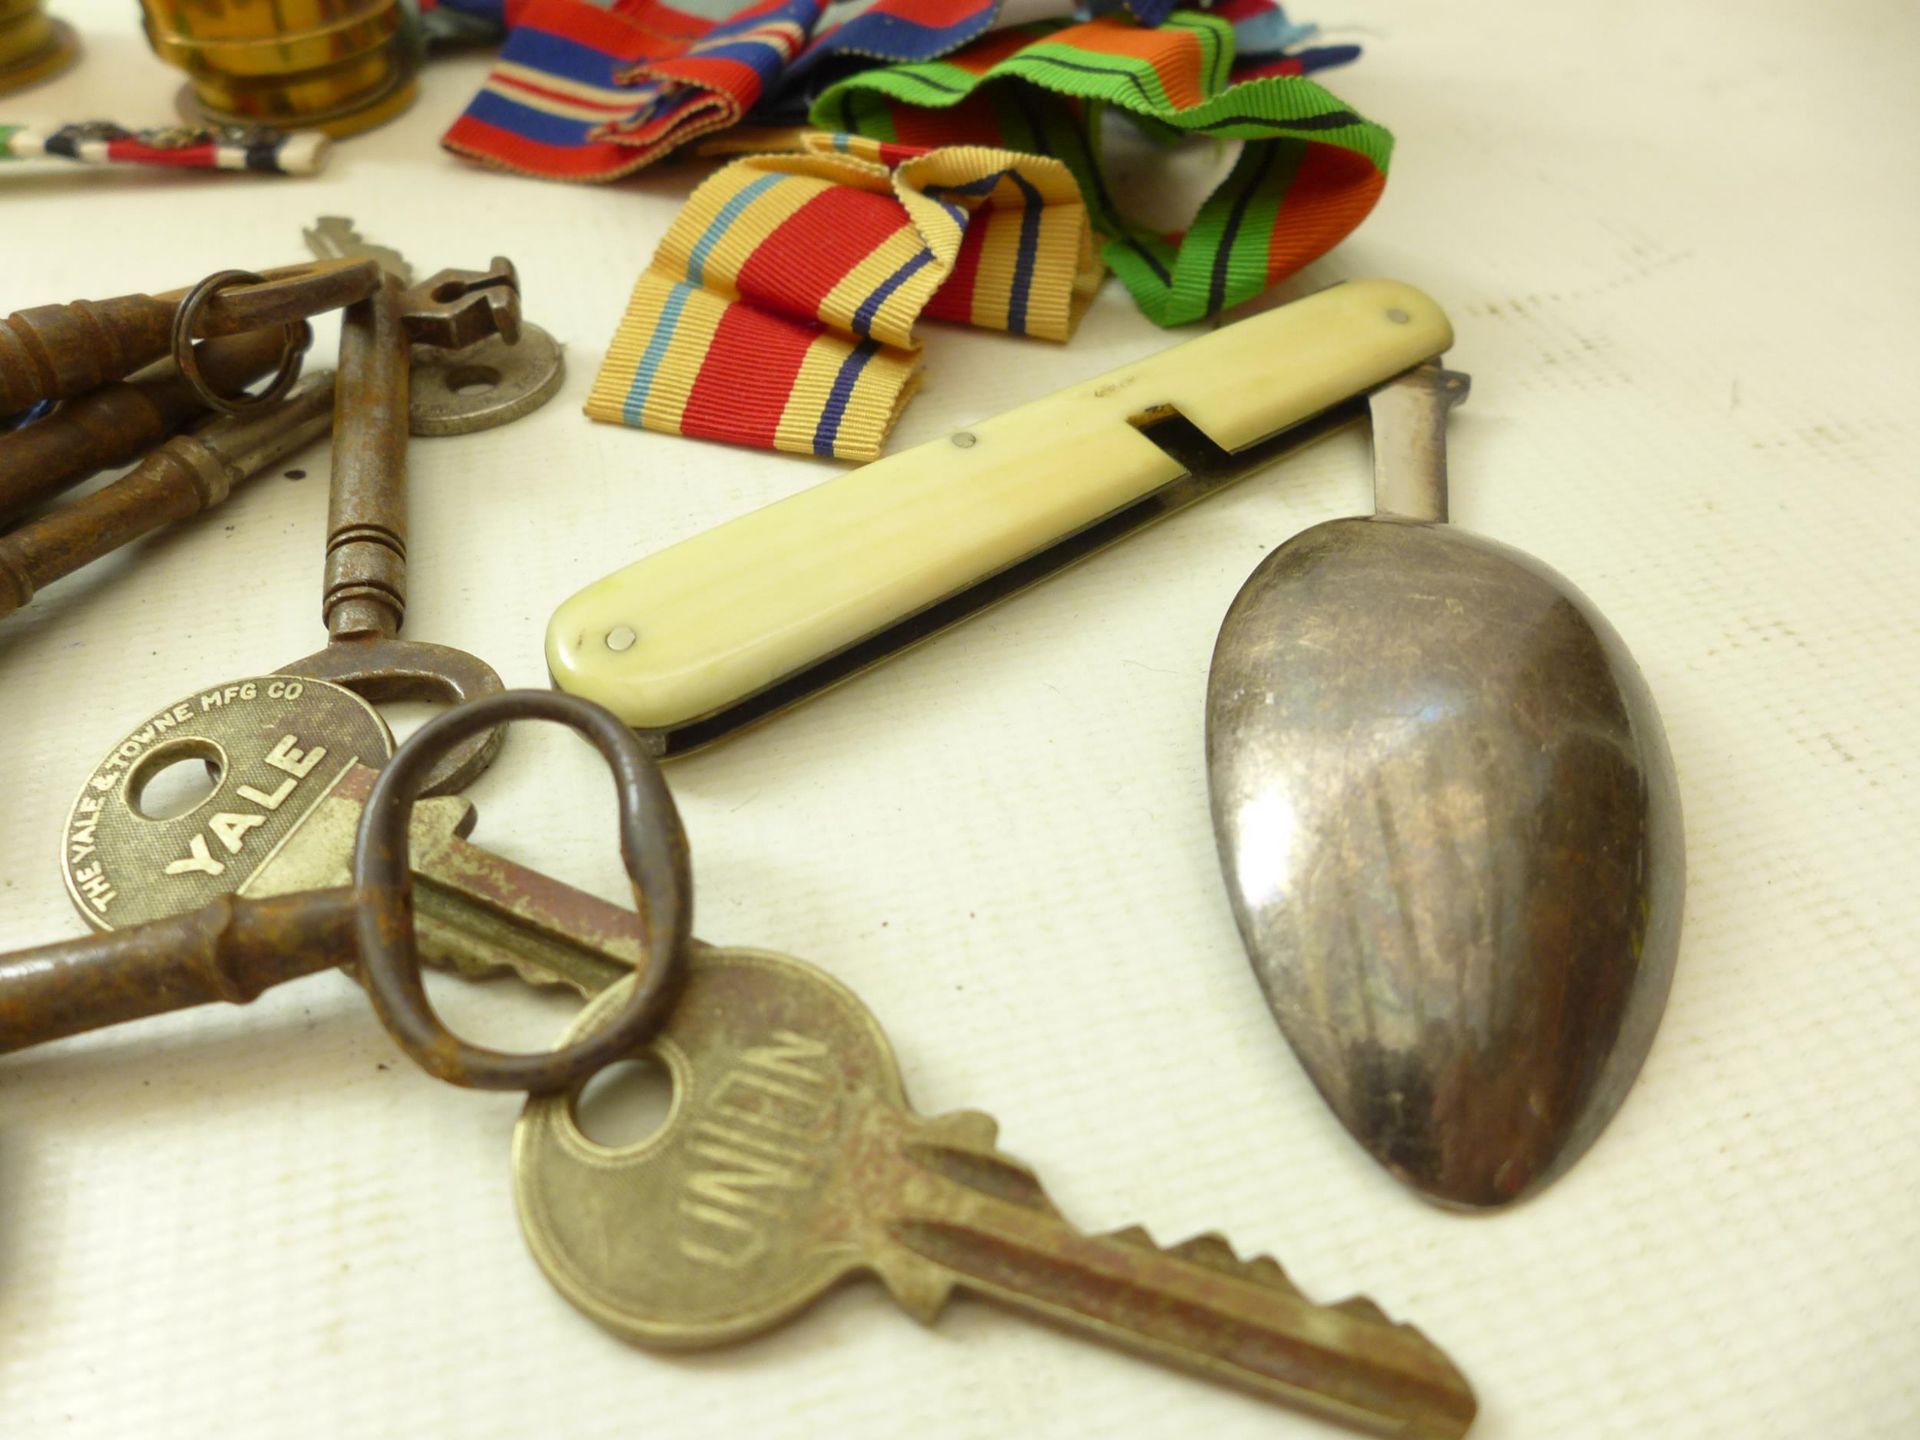 THREE BRASS SHELL CASES, HEIGHTS 7CM TO 11CM, MEDAL RIBBONS, KEYS ETC - Image 2 of 4